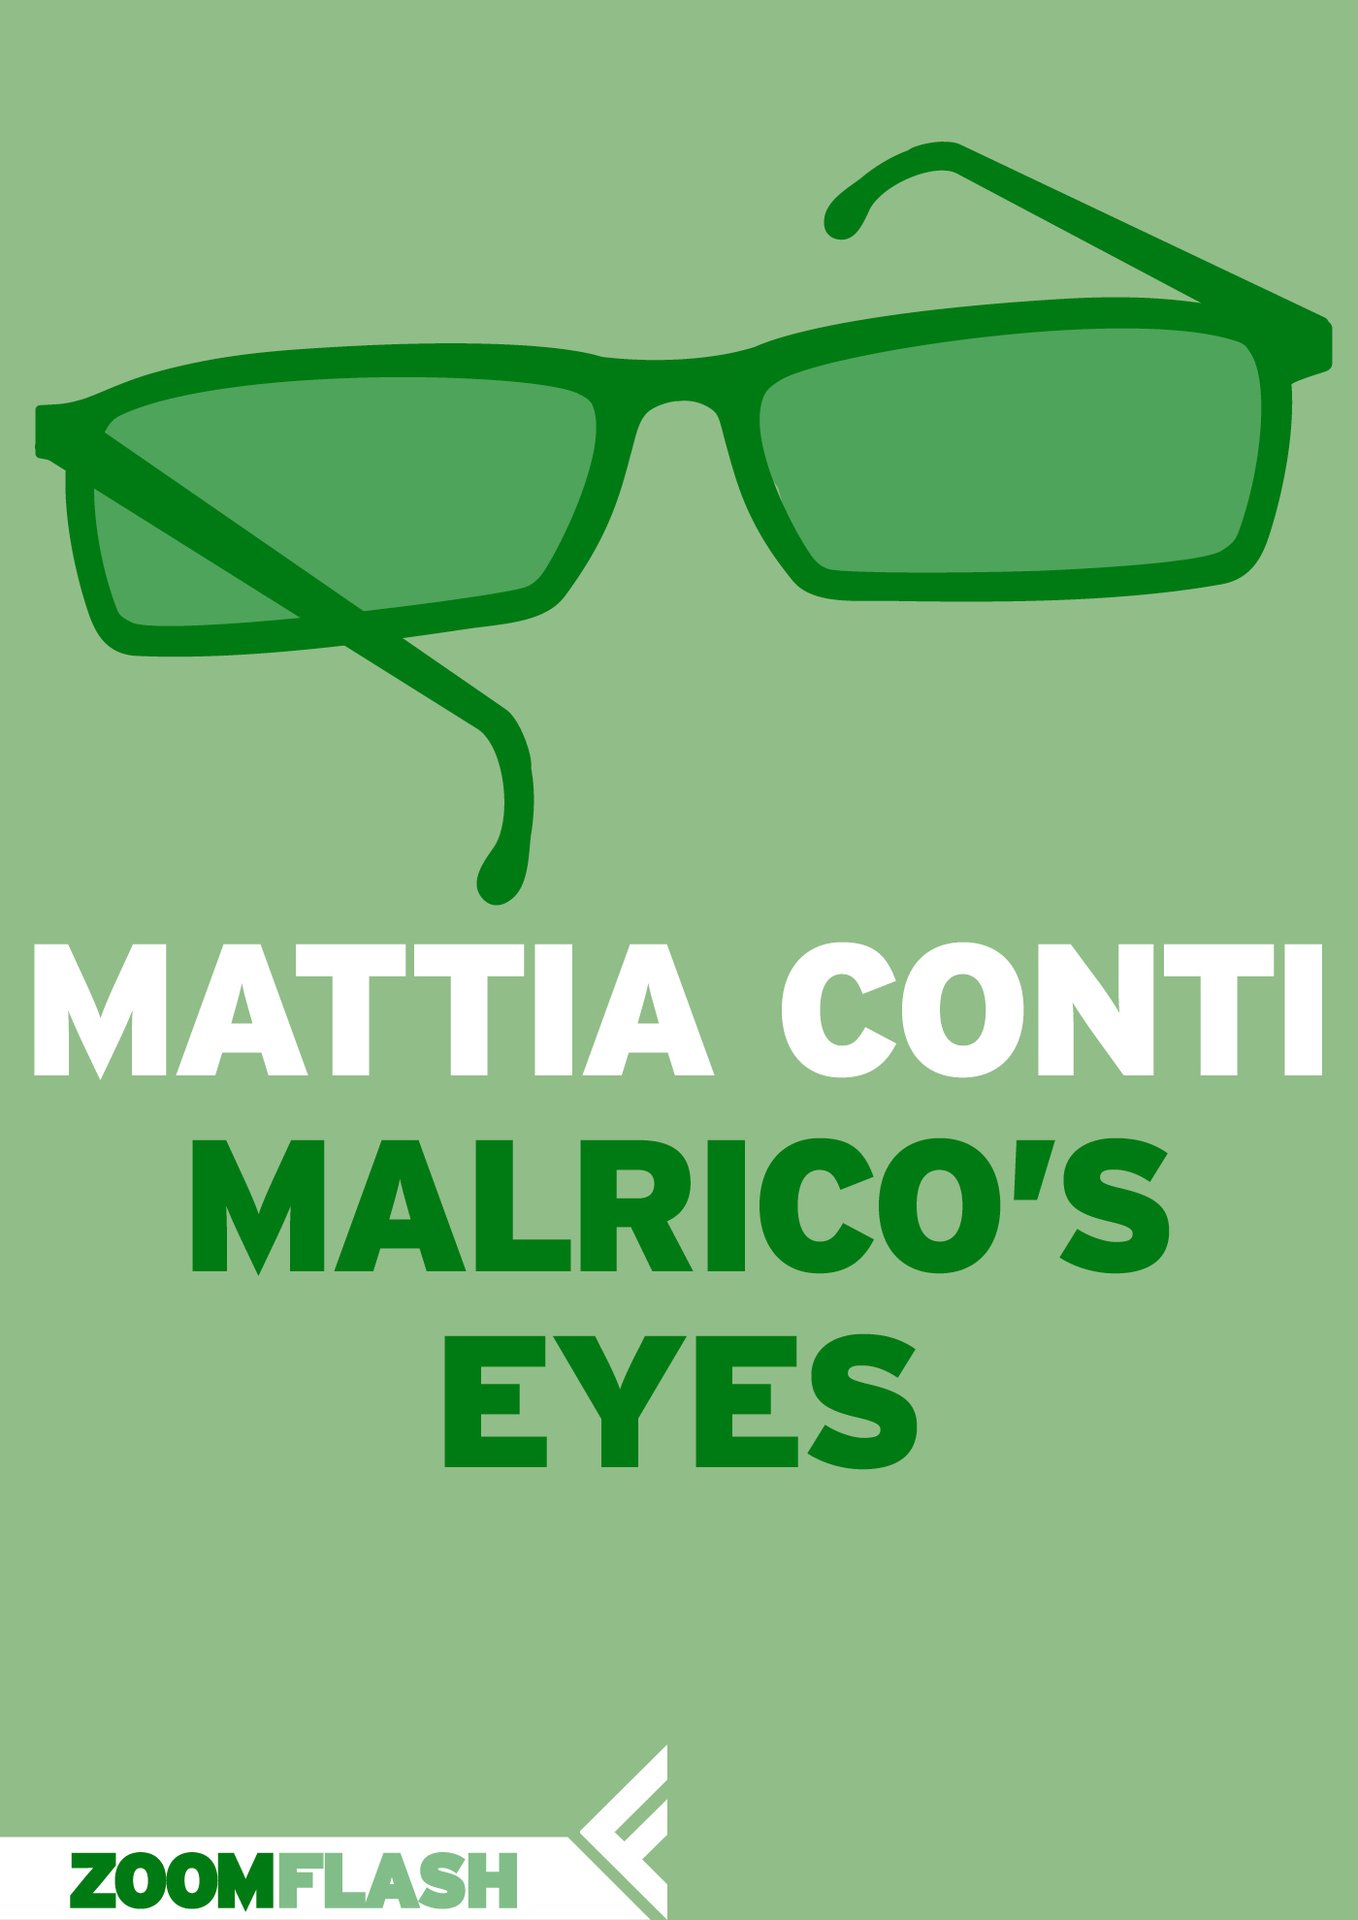 Malrico’s Eyes